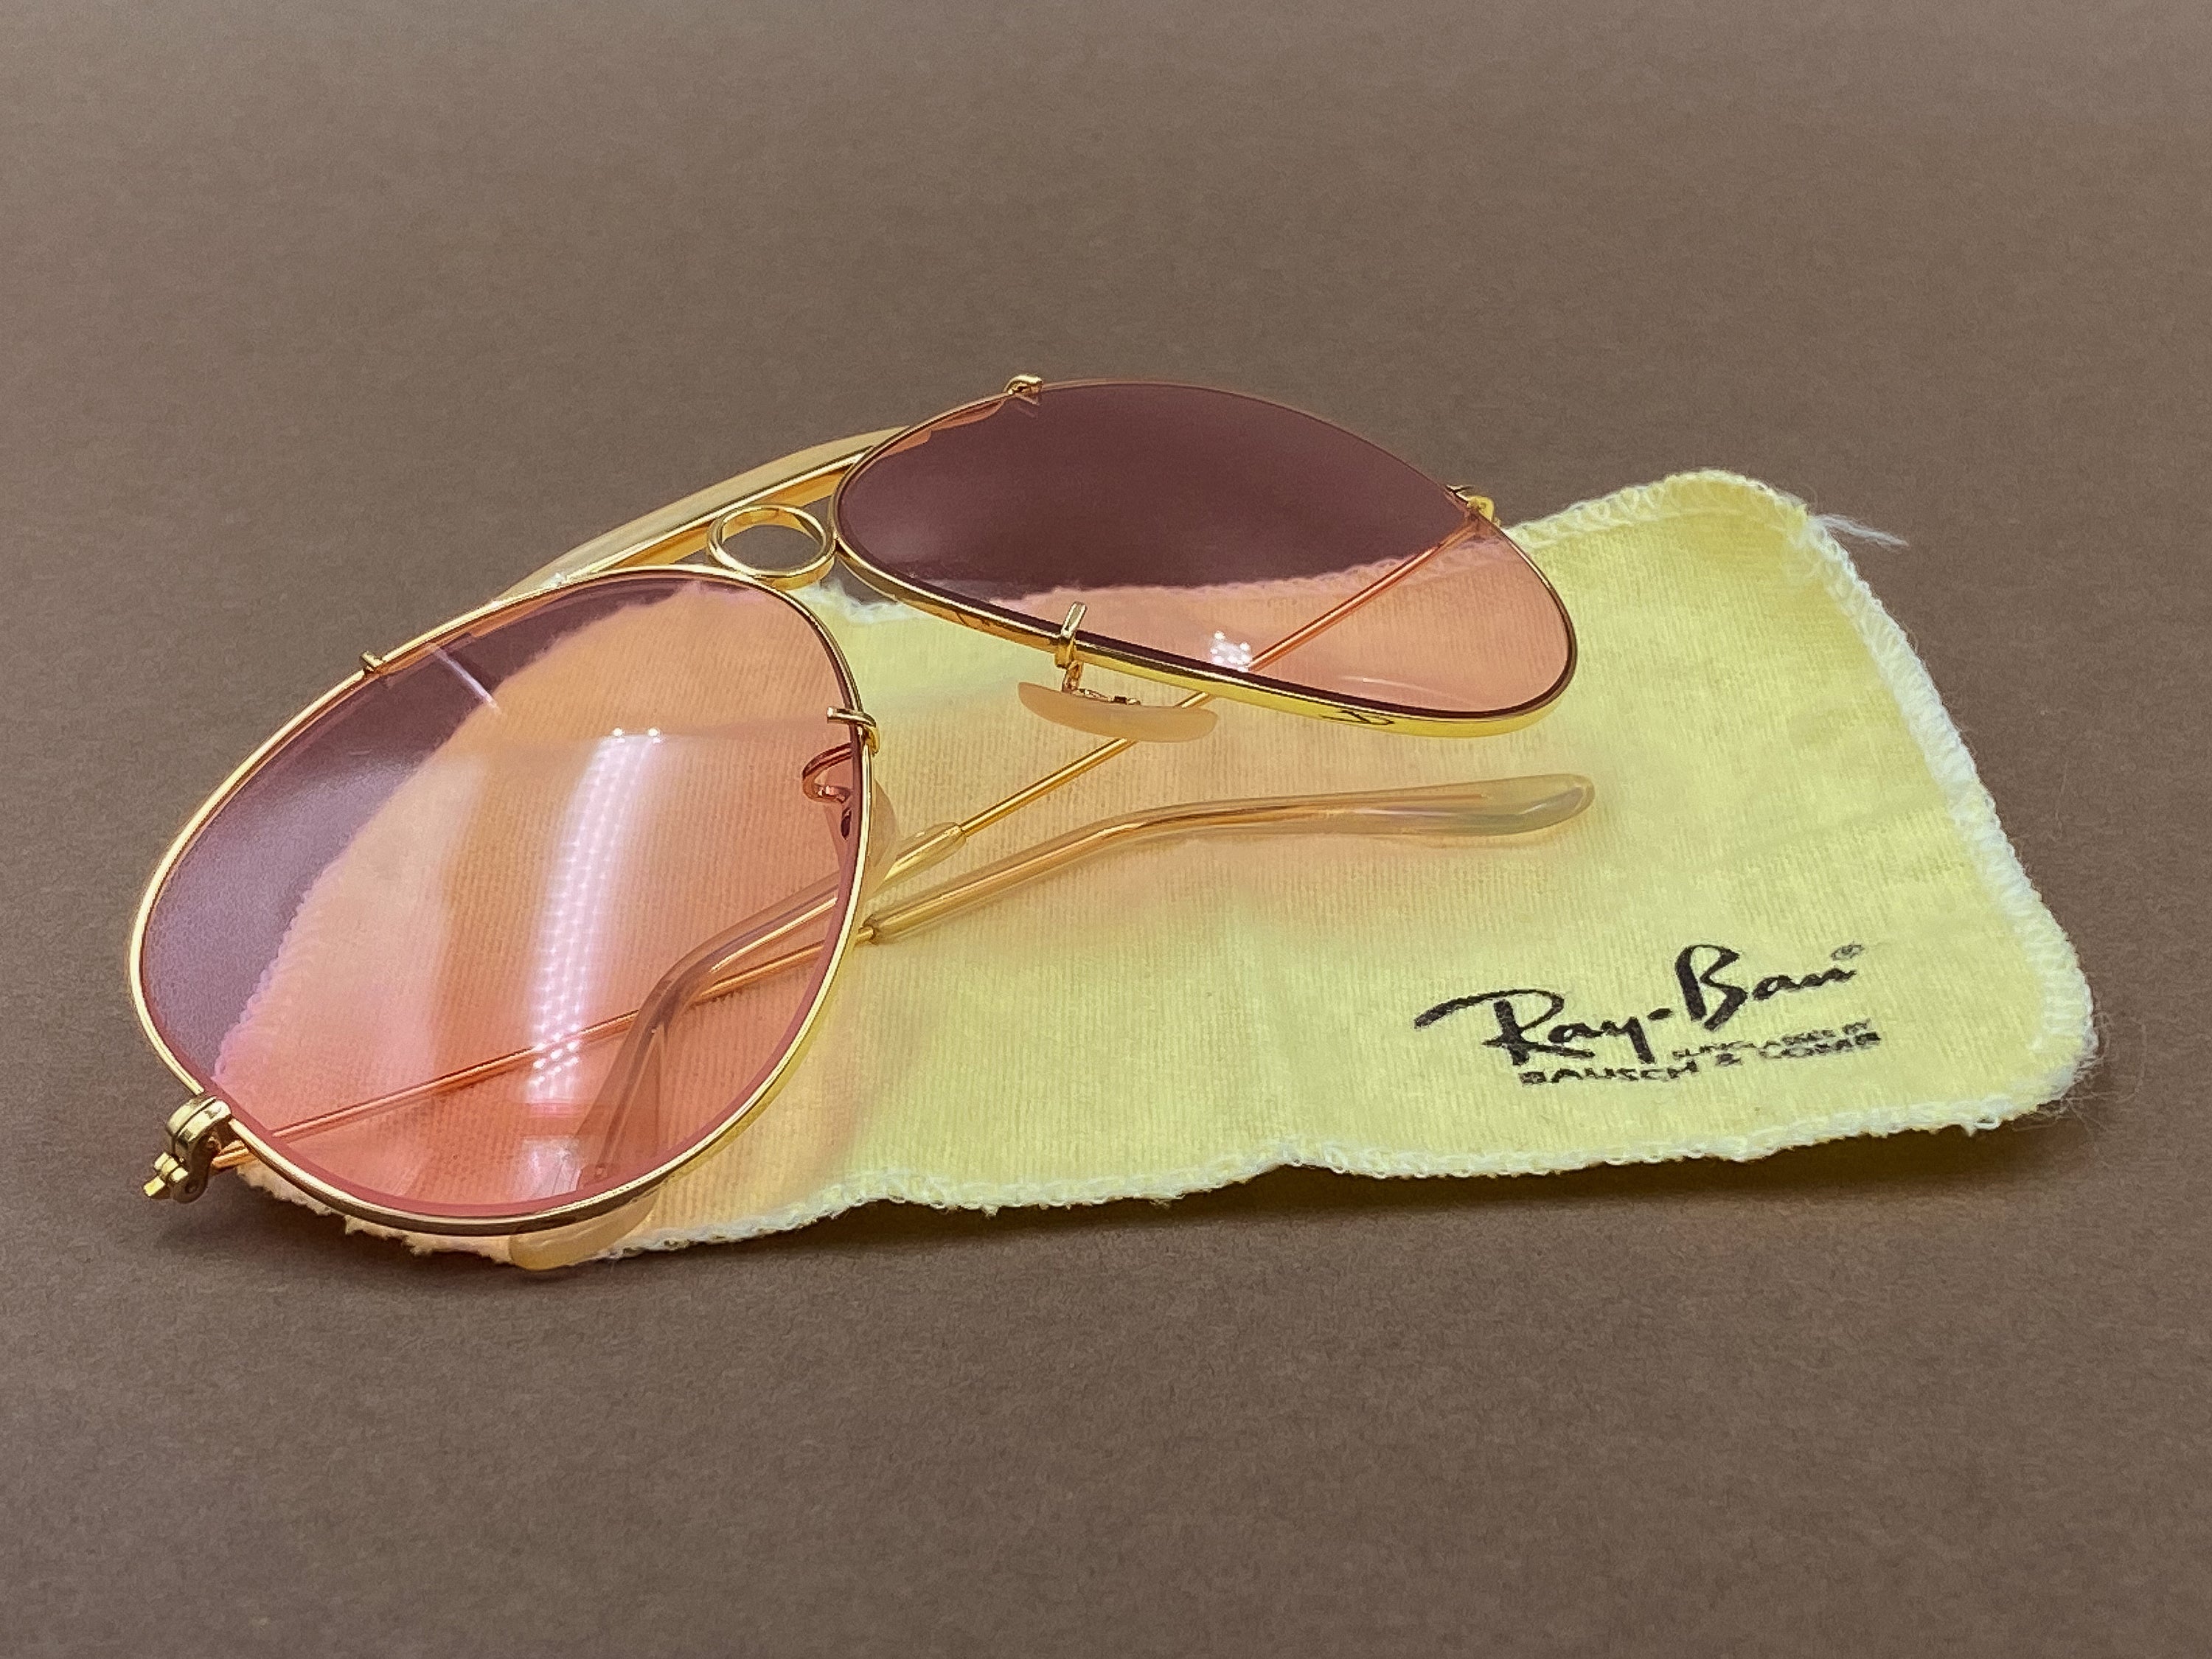 Ray-Ban Pink Changeables Shooter sunglasses